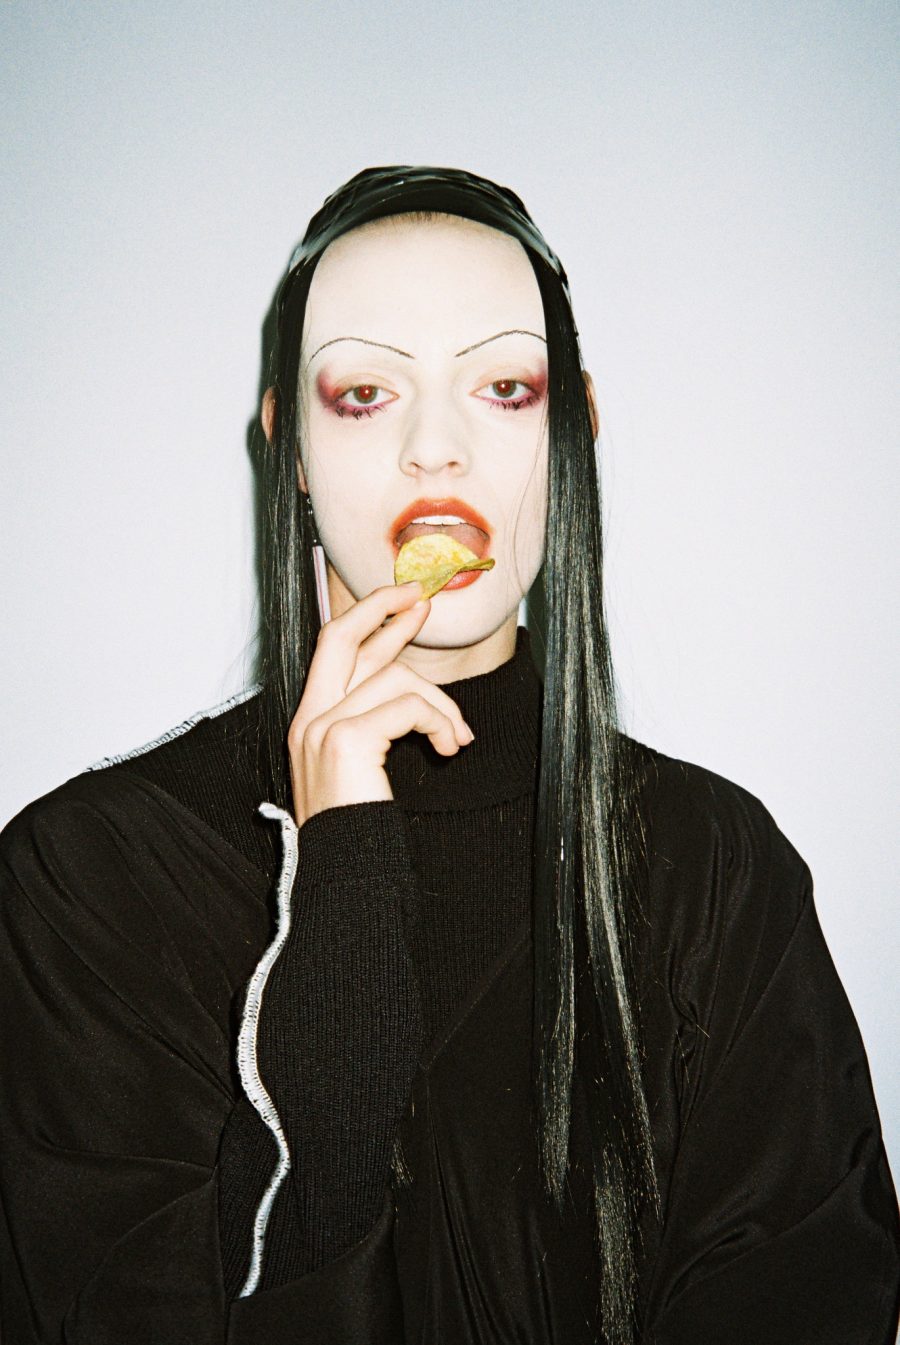 A person eating chips with a full face of makeup and a black sweater with white visible seams. Design by Jimmy D.